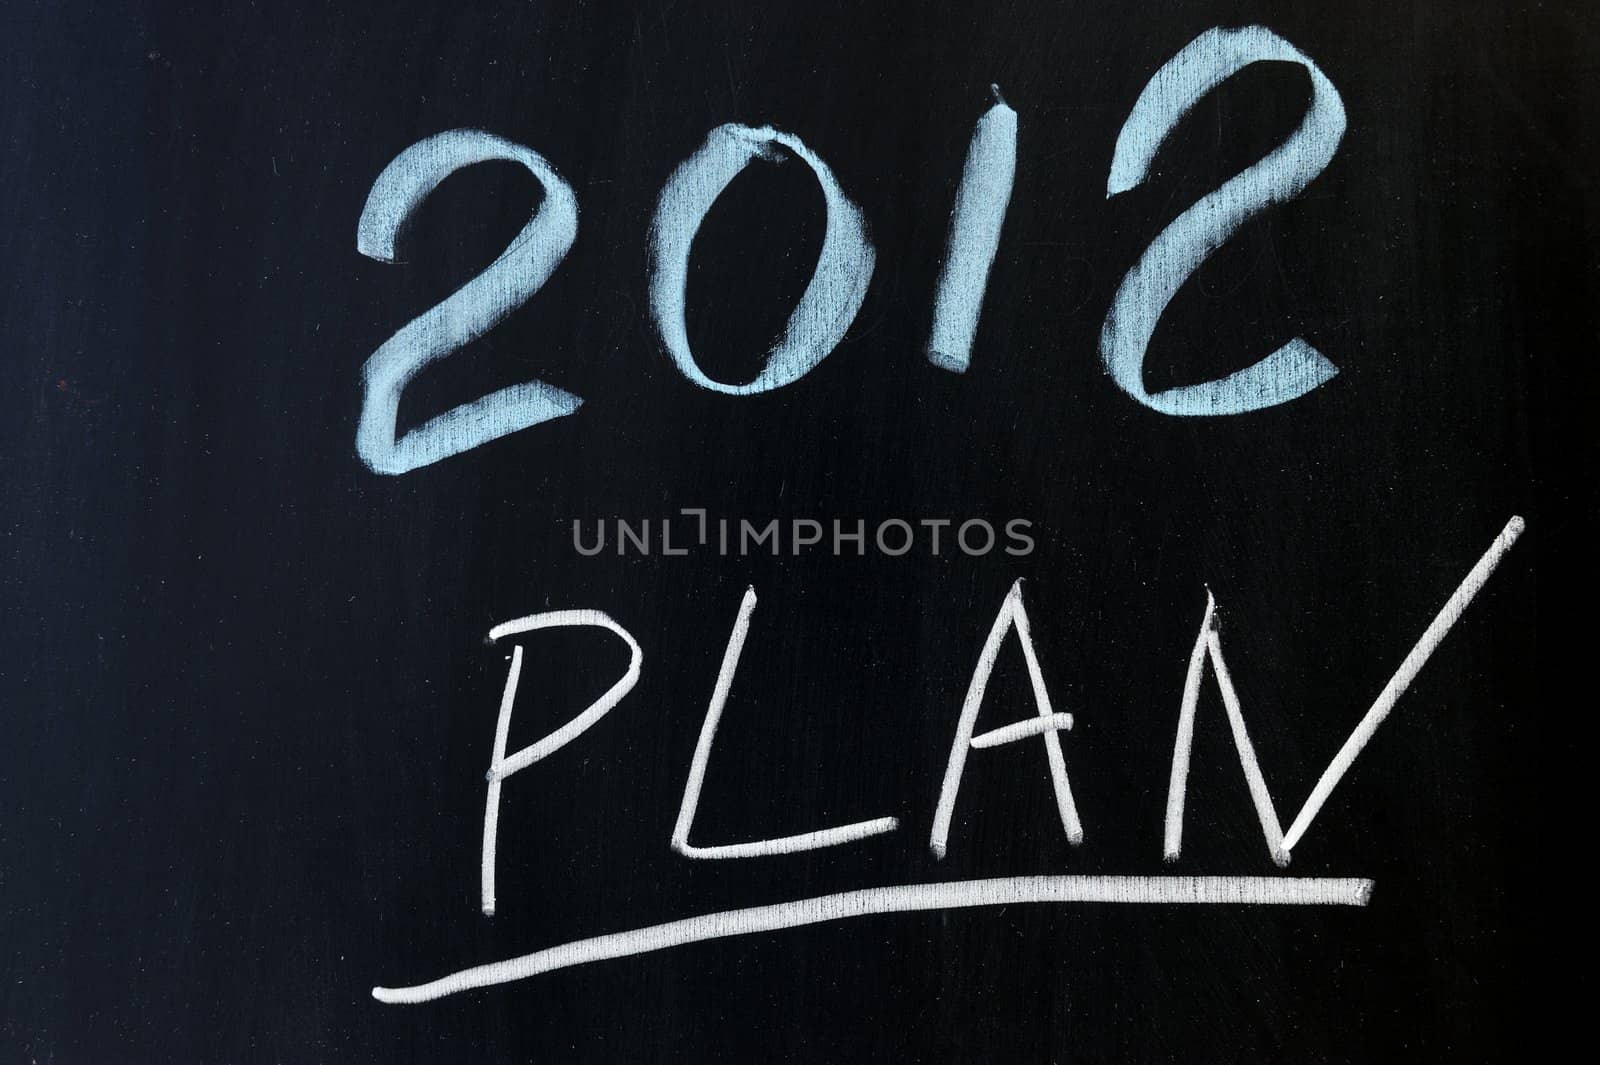 Chalkboard drawing - 2012 new year plans